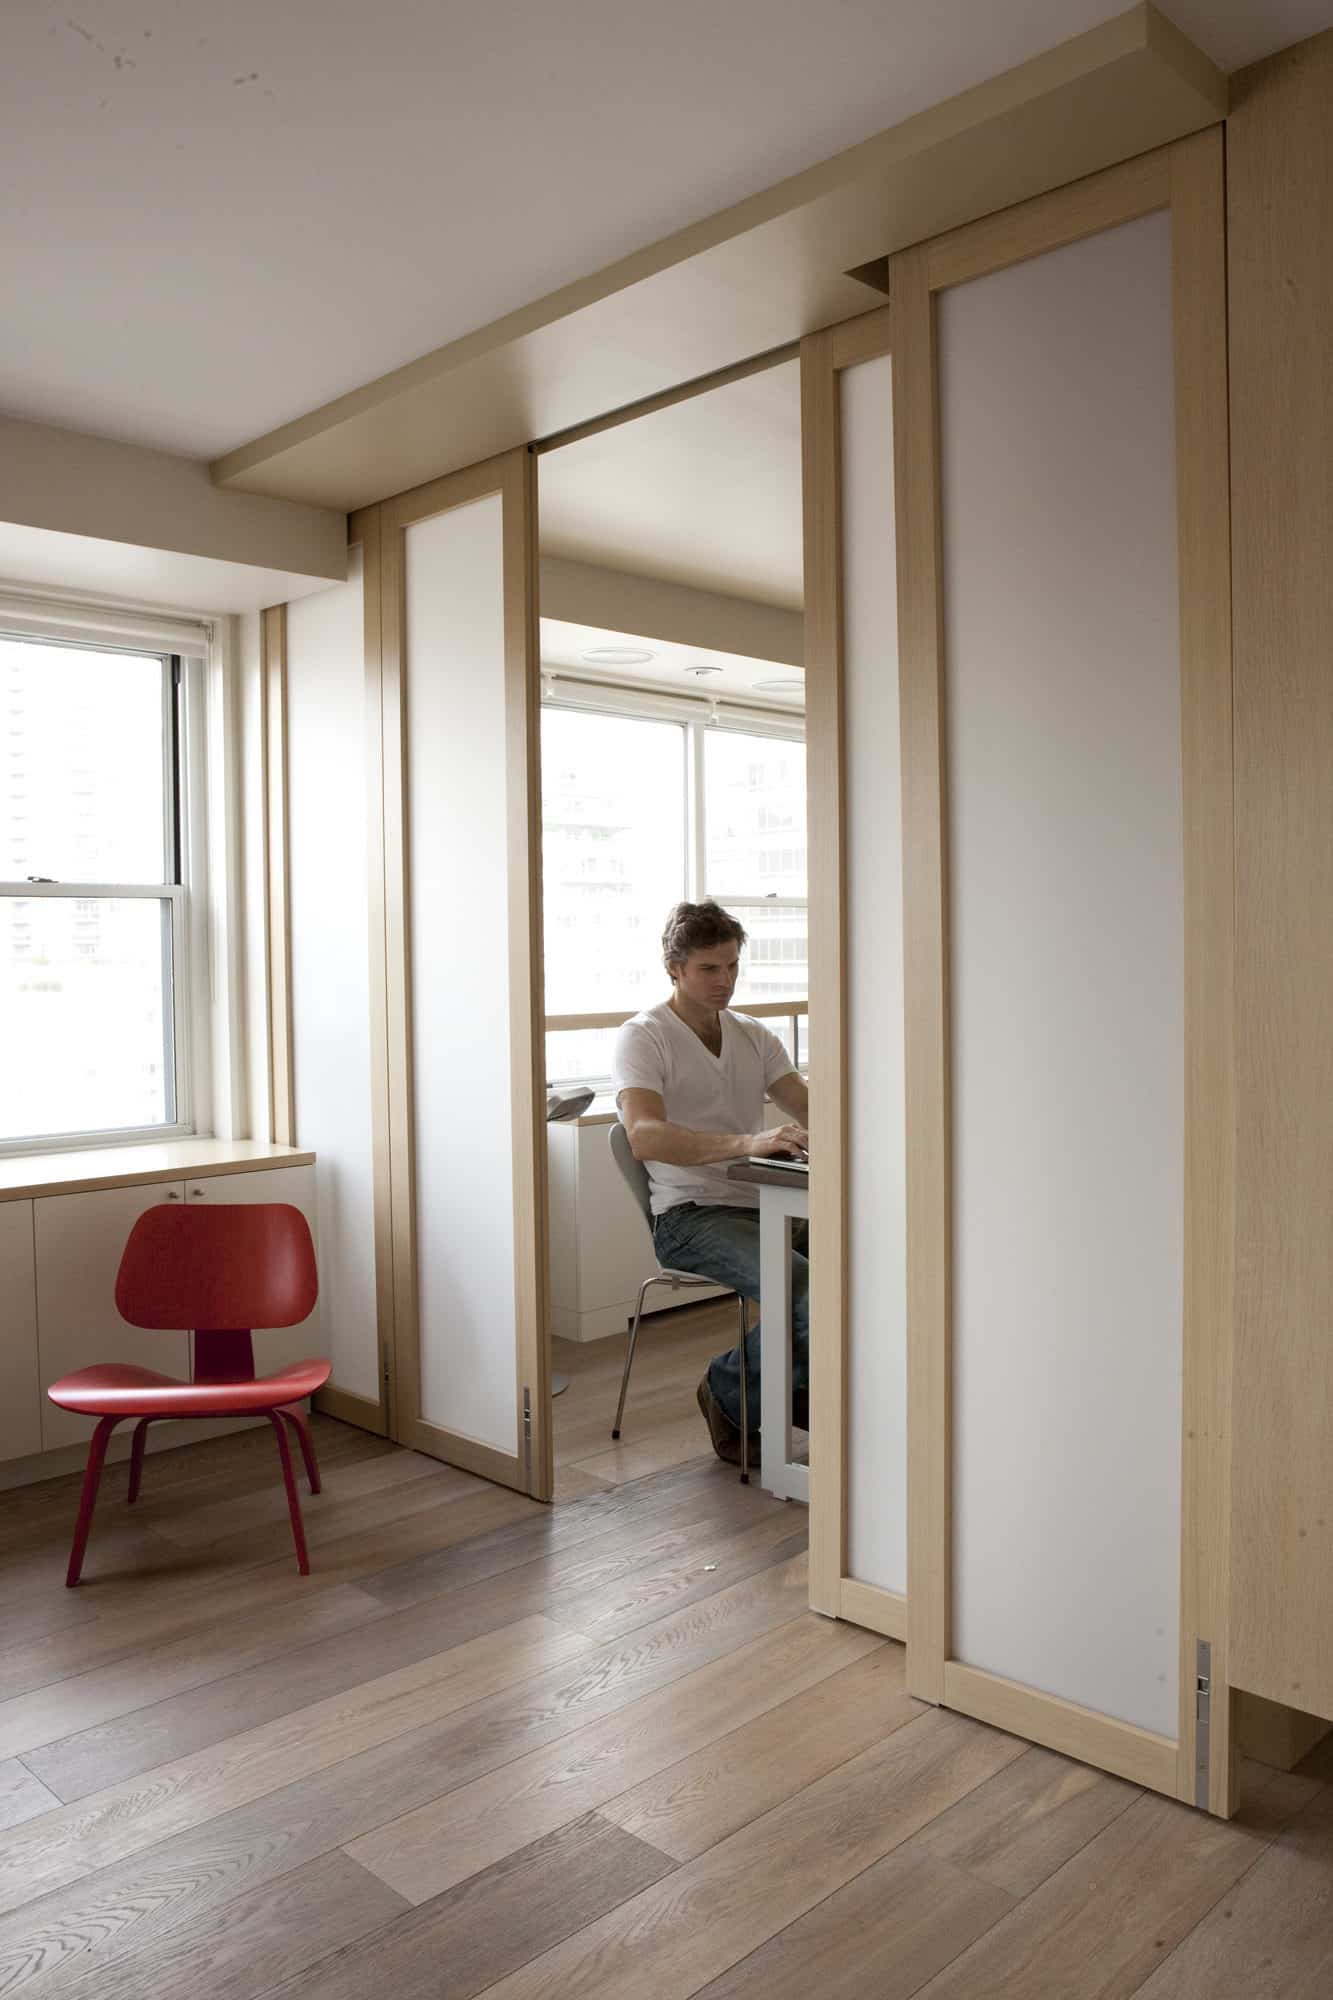 Opaque light wooden stacking doors opened into an office with a man working at a desk.